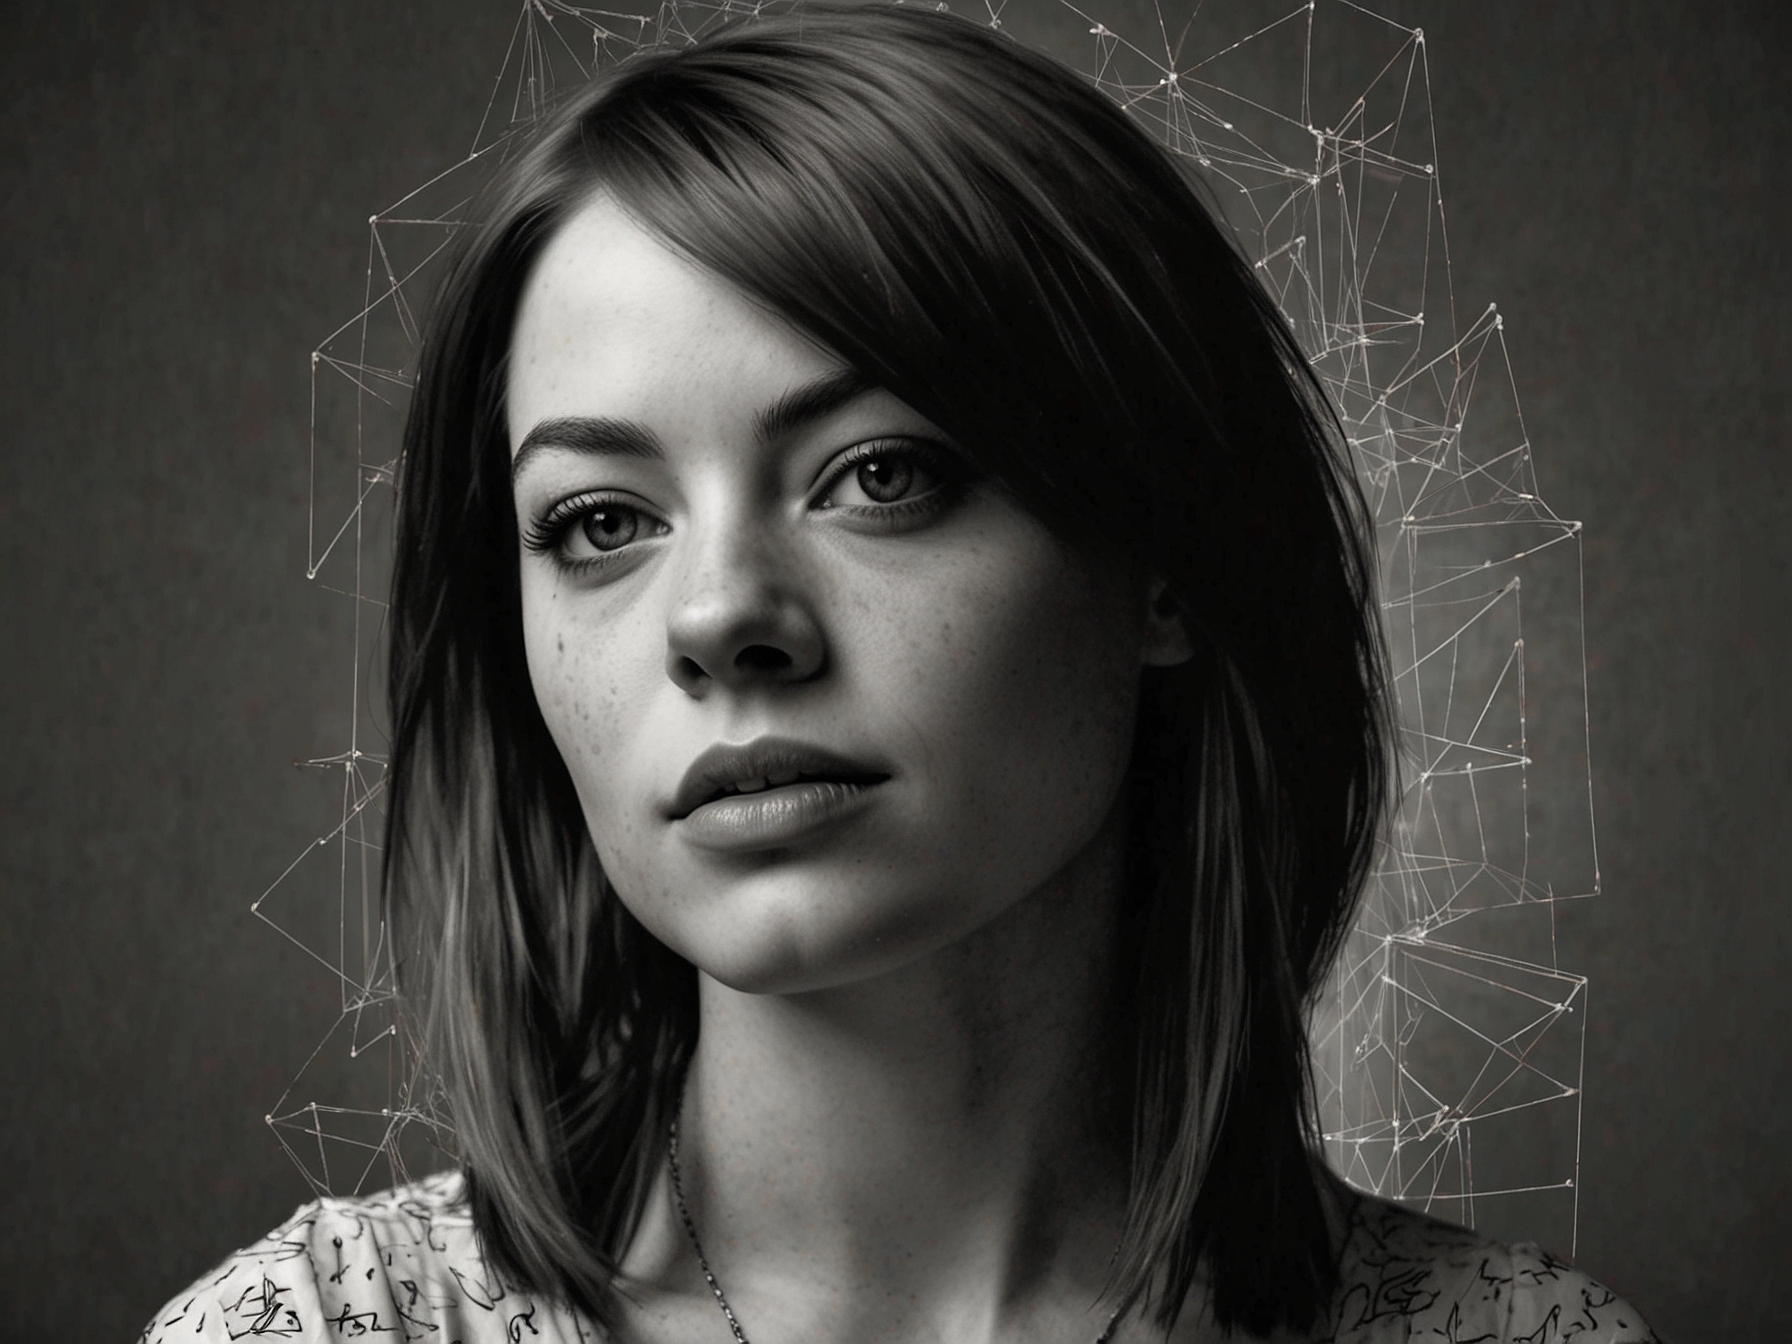 A split image showing Emma Stone on one side, with 'Emily' written, and the other side as her famous 'Emma' persona, showcasing her multifaceted identity.